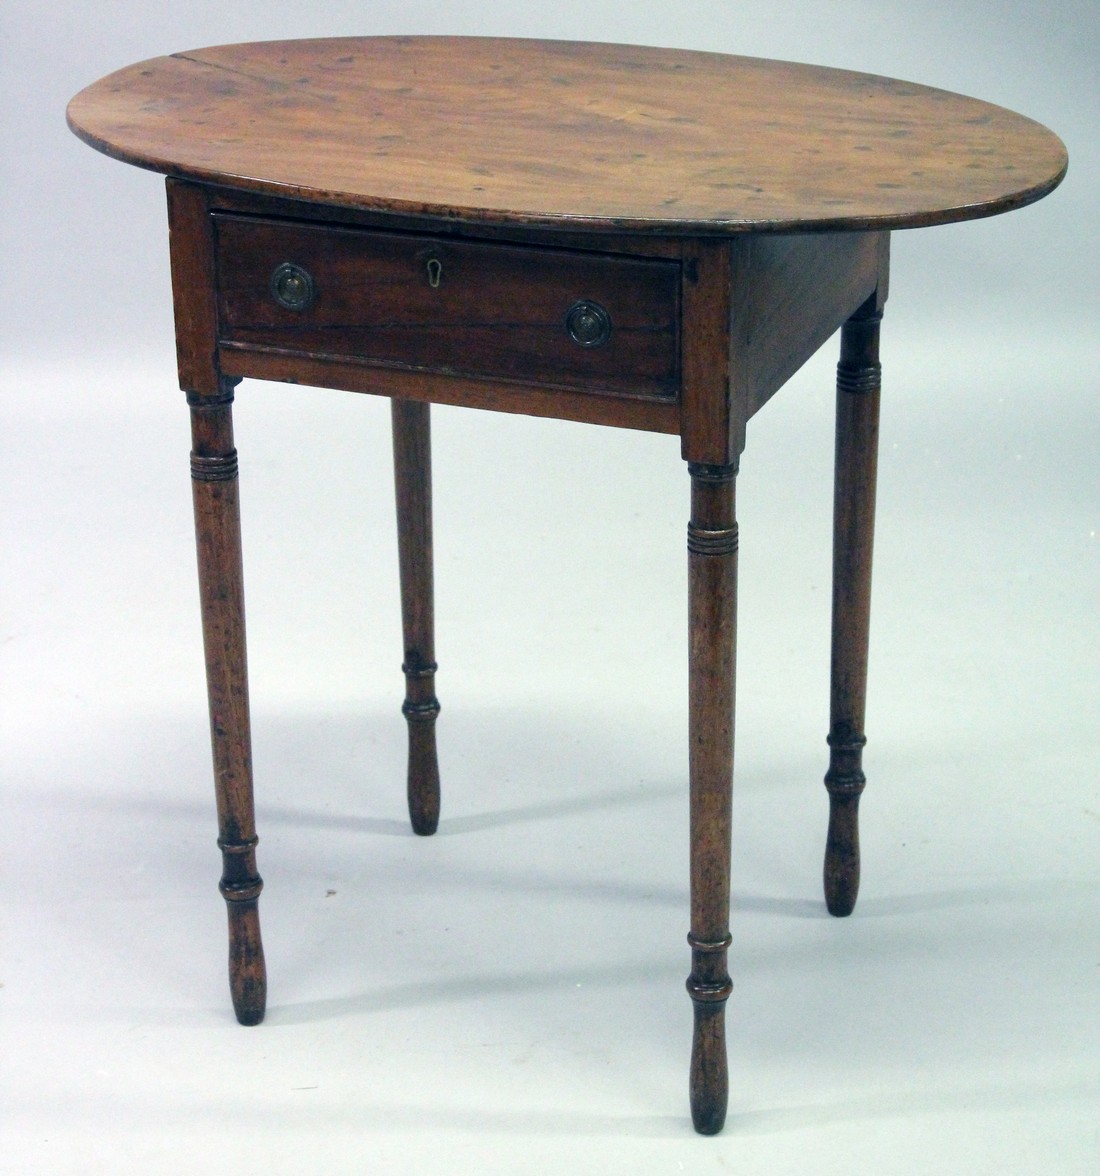 A 19TH CENTURY IRISH YEW WOOD OVAL TABLE sold by HODGES & SON, DUBLIN with plain oval top, single